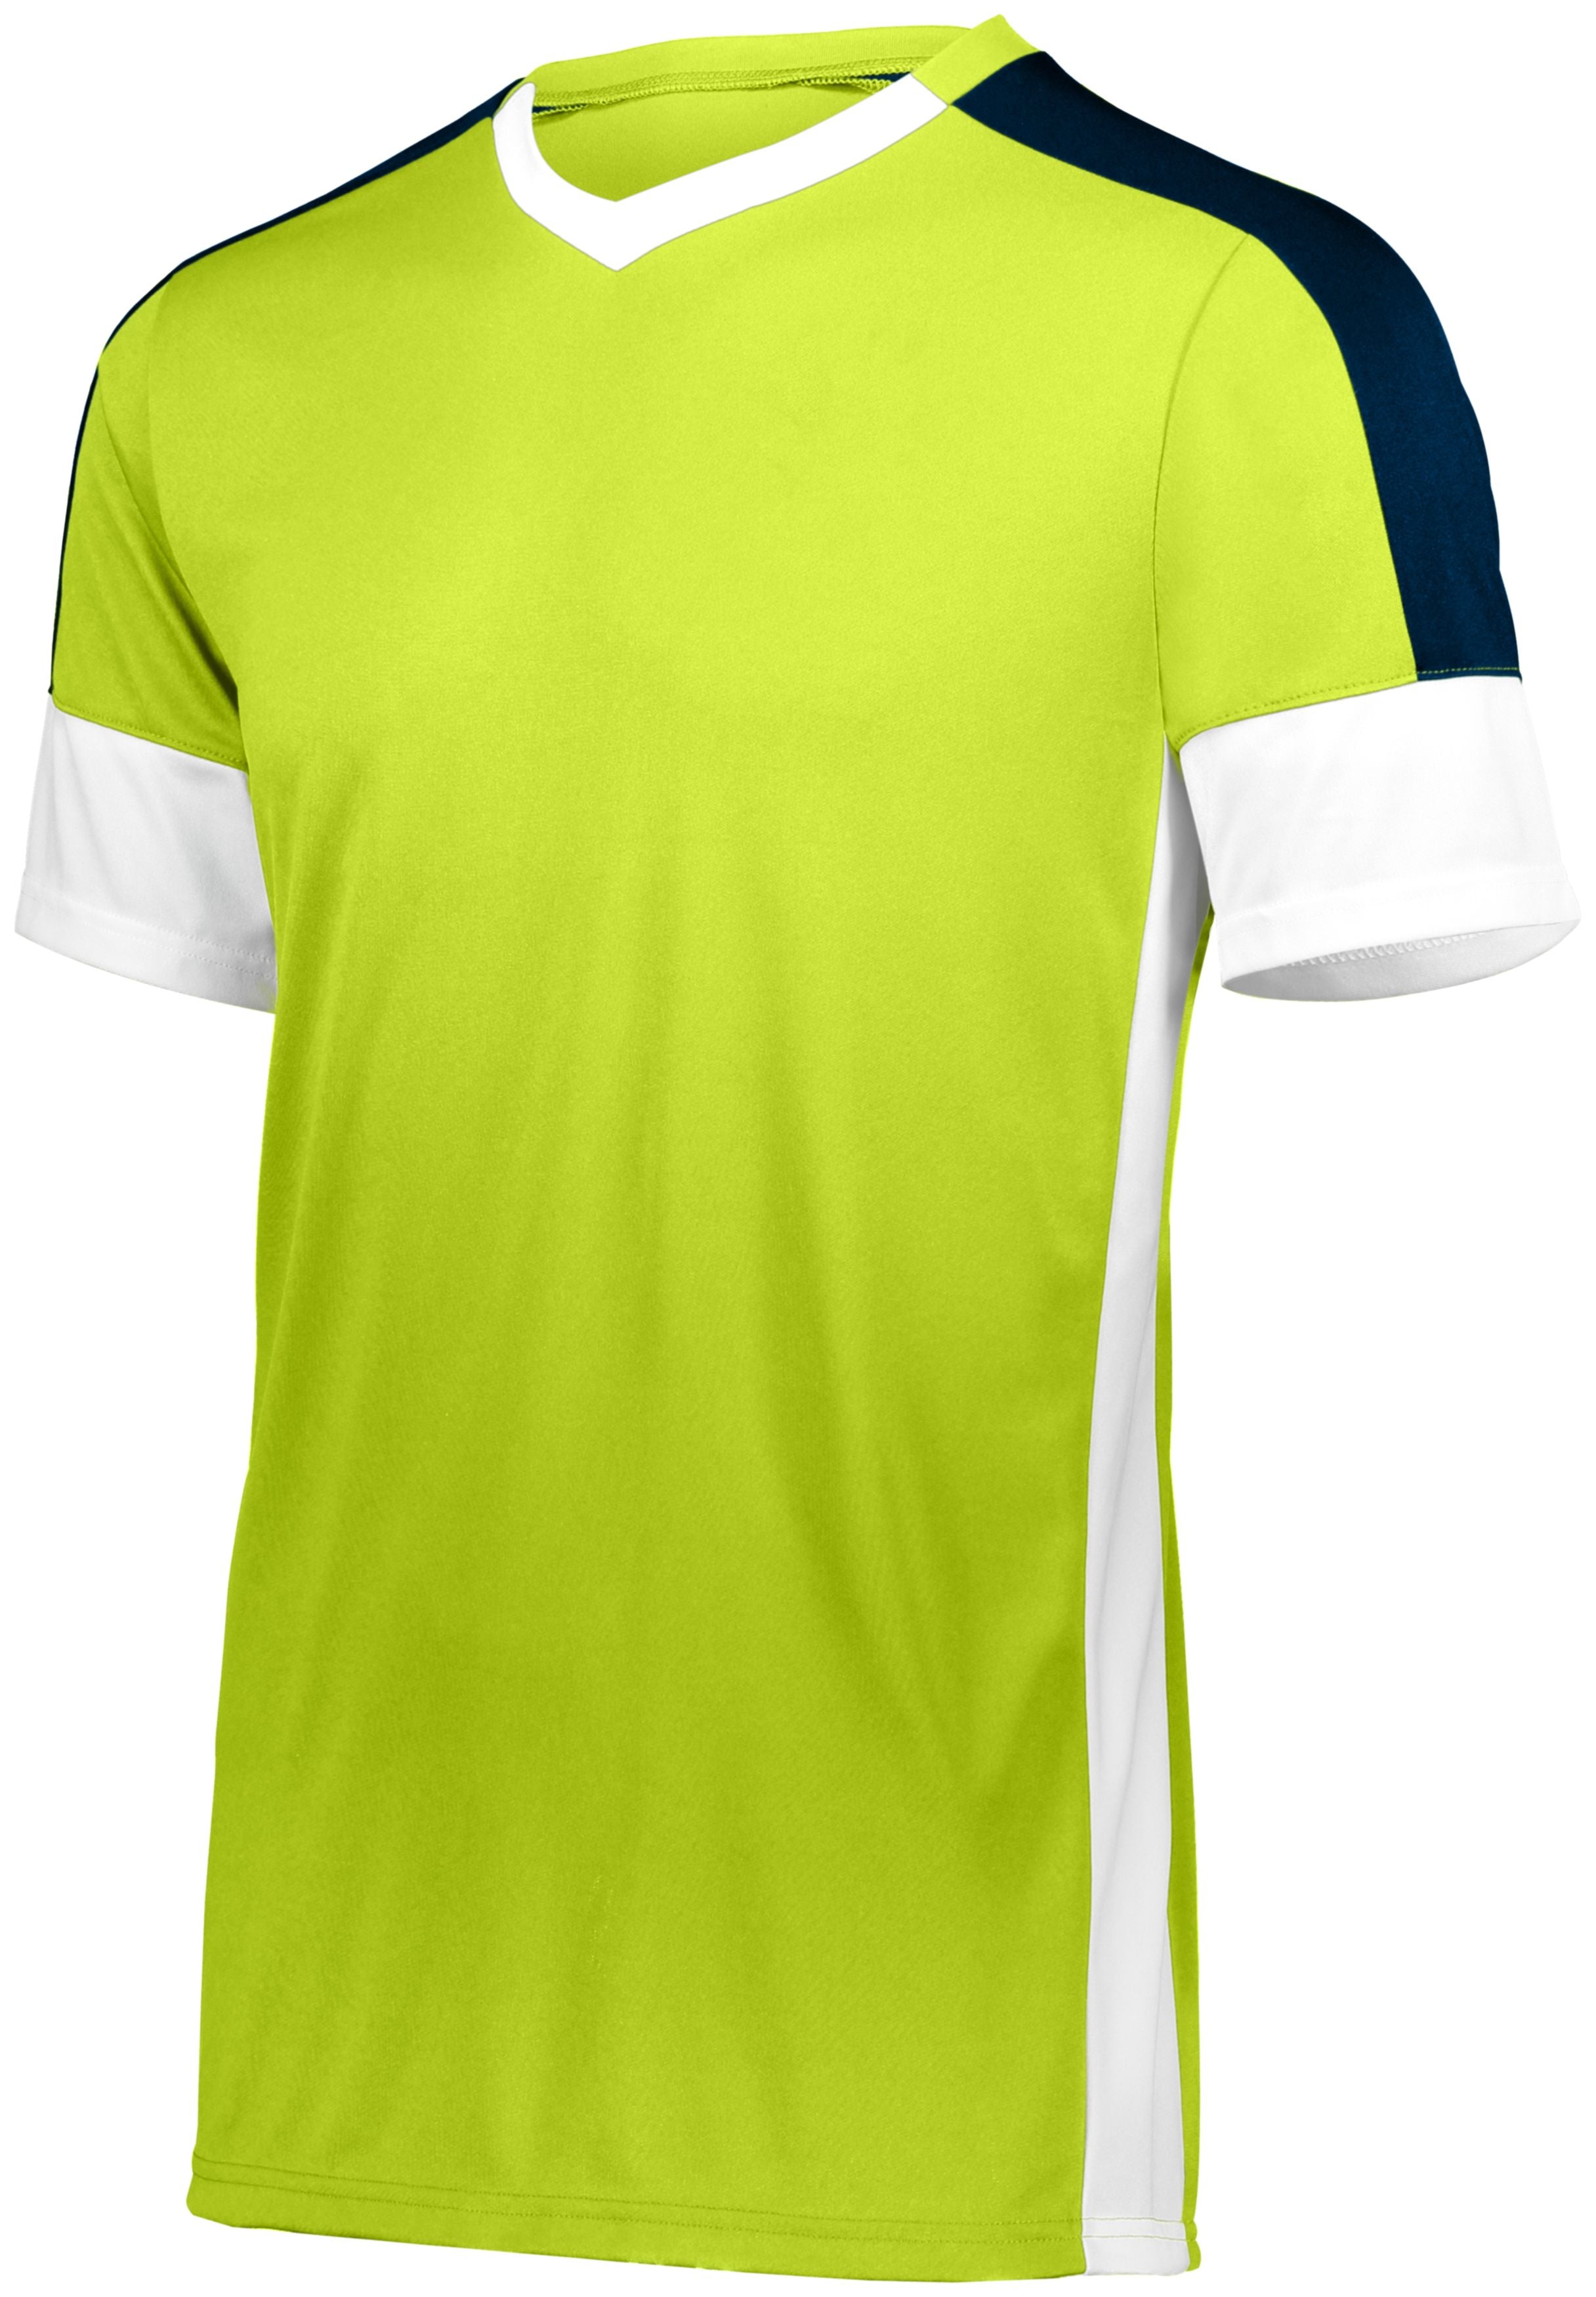 High 5 Youth Wembley Soccer Jersey in Lime/White/Navy  -Part of the Youth, Youth-Jersey, High5-Products, Soccer, Shirts, All-Sports-1 product lines at KanaleyCreations.com